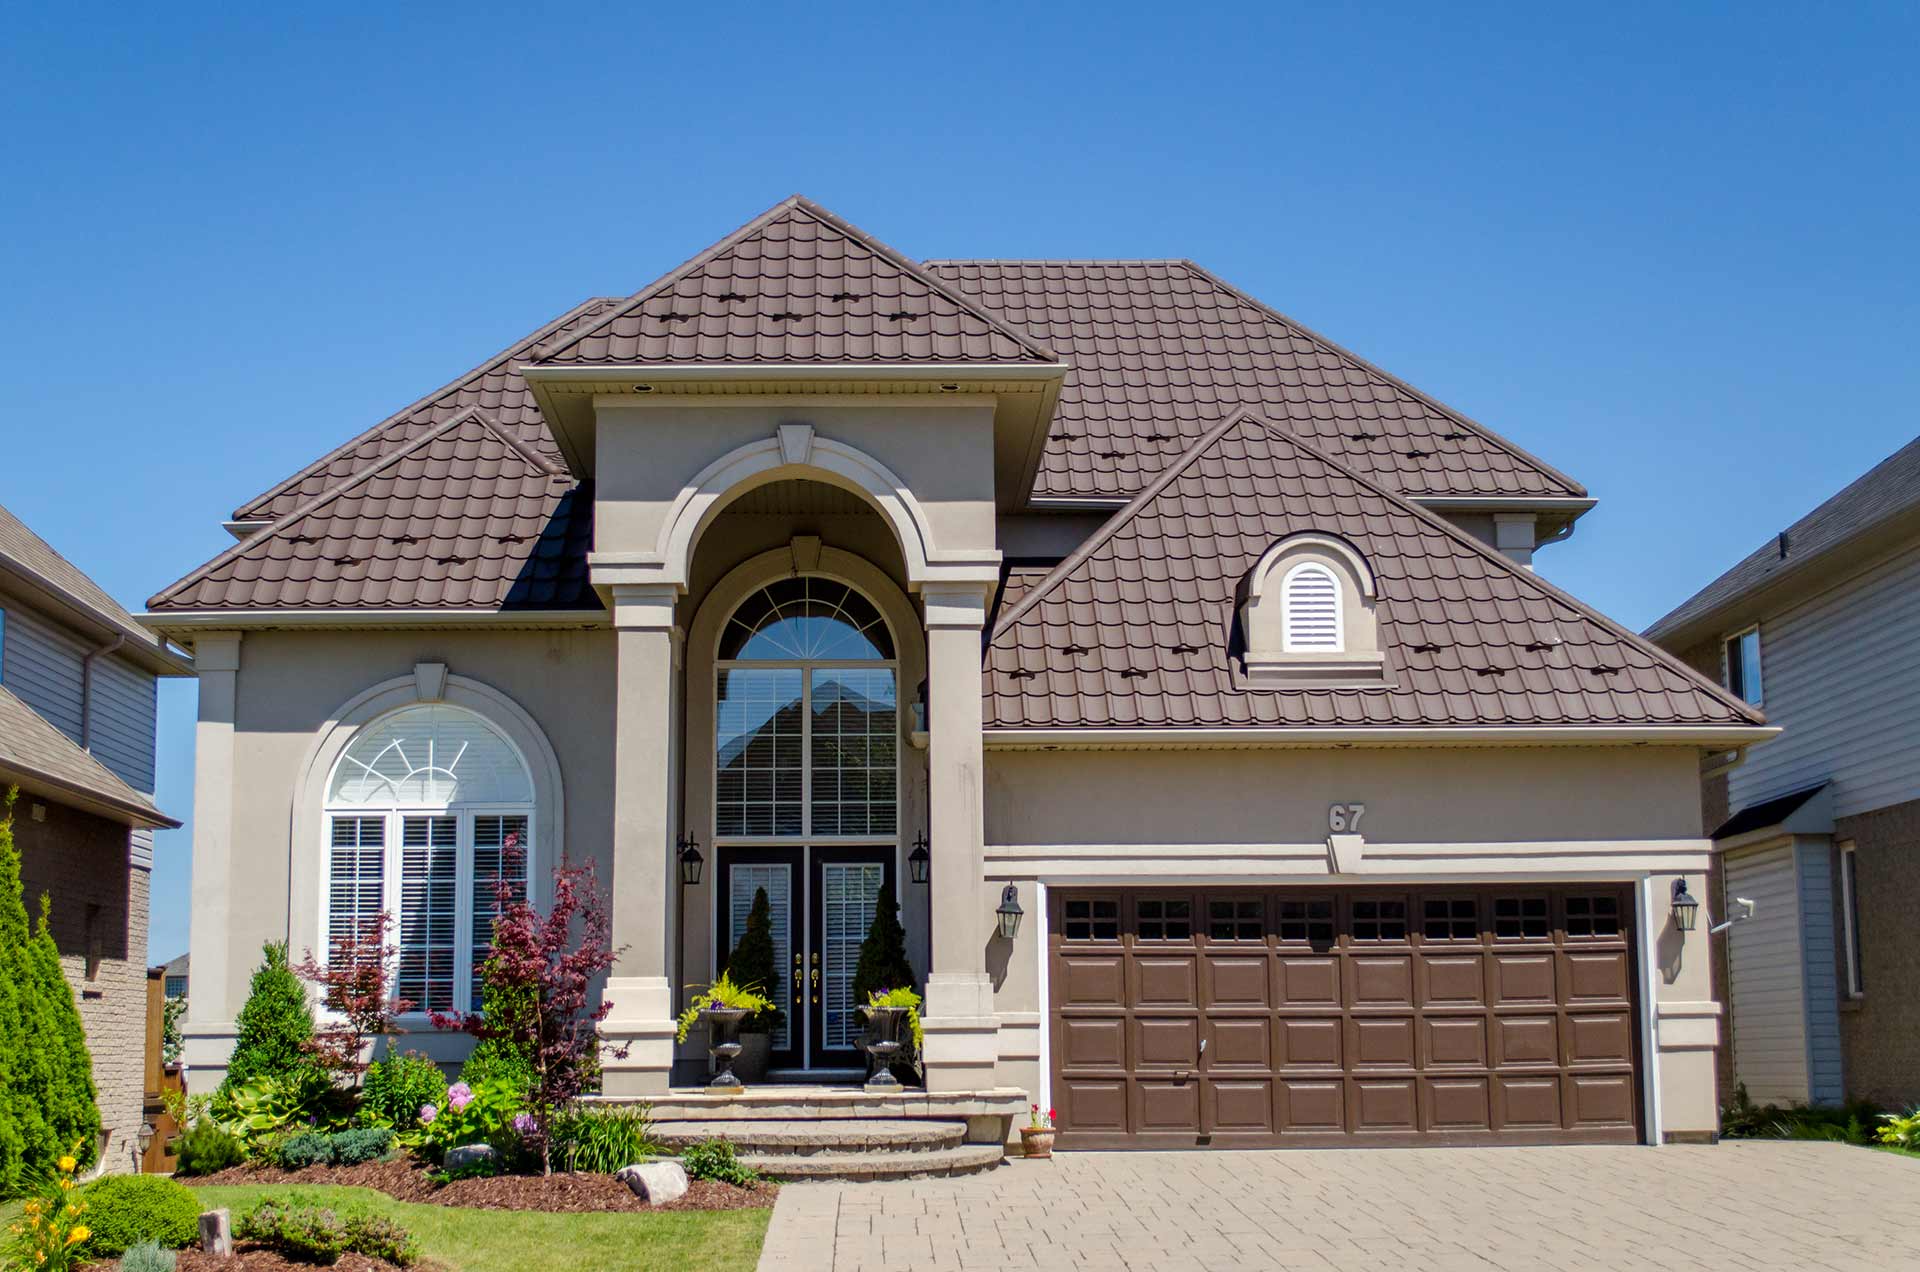 How Much Does Metal Roof Cost?